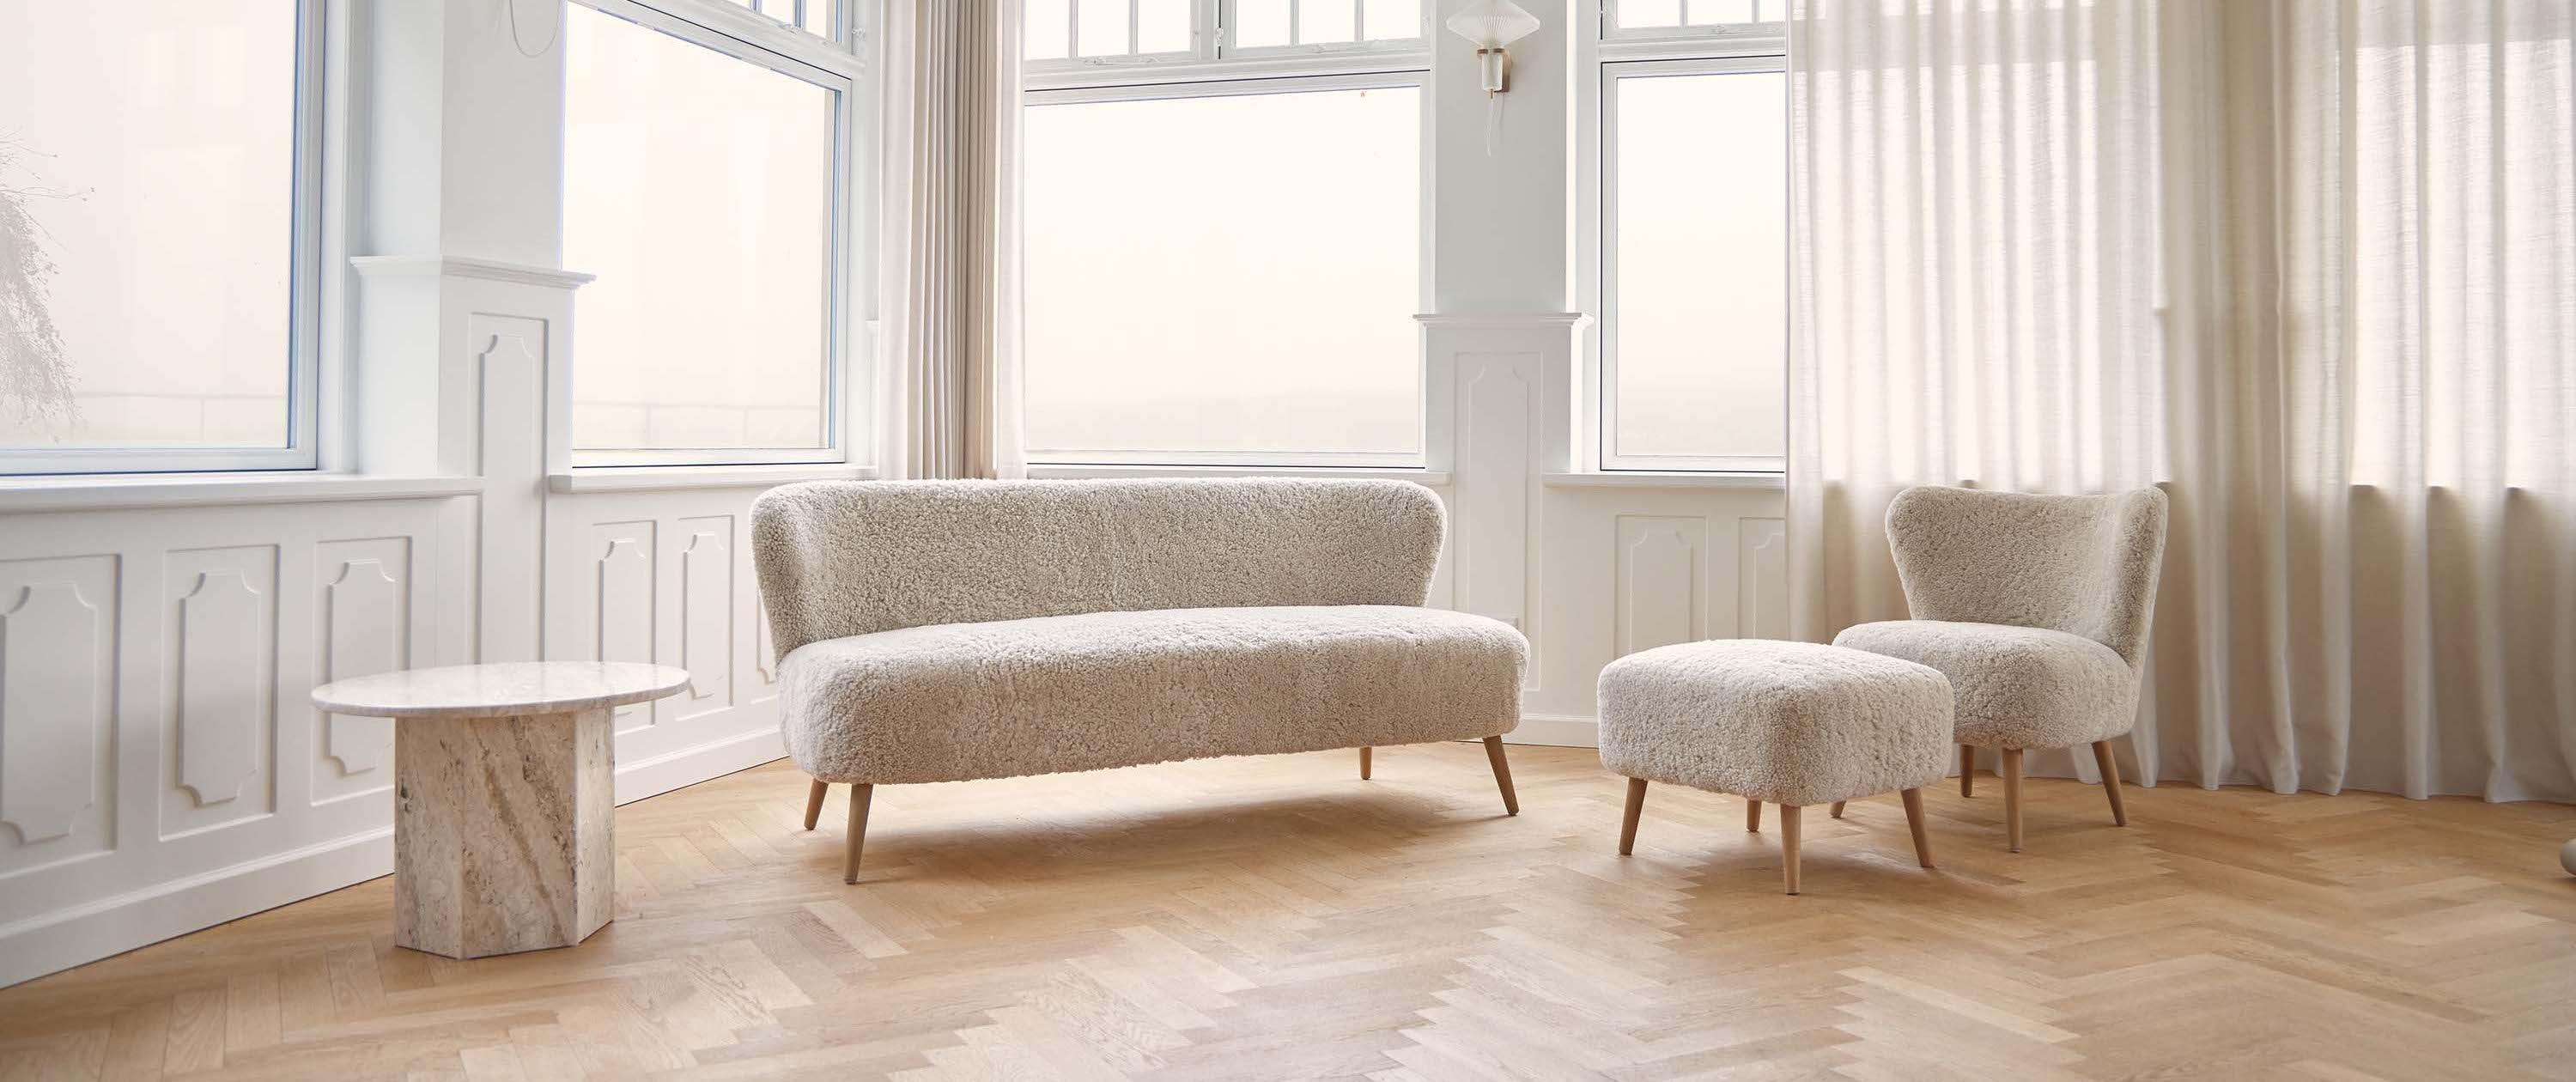 Decorate your home with sustainable furniture - Naturescollection.eu